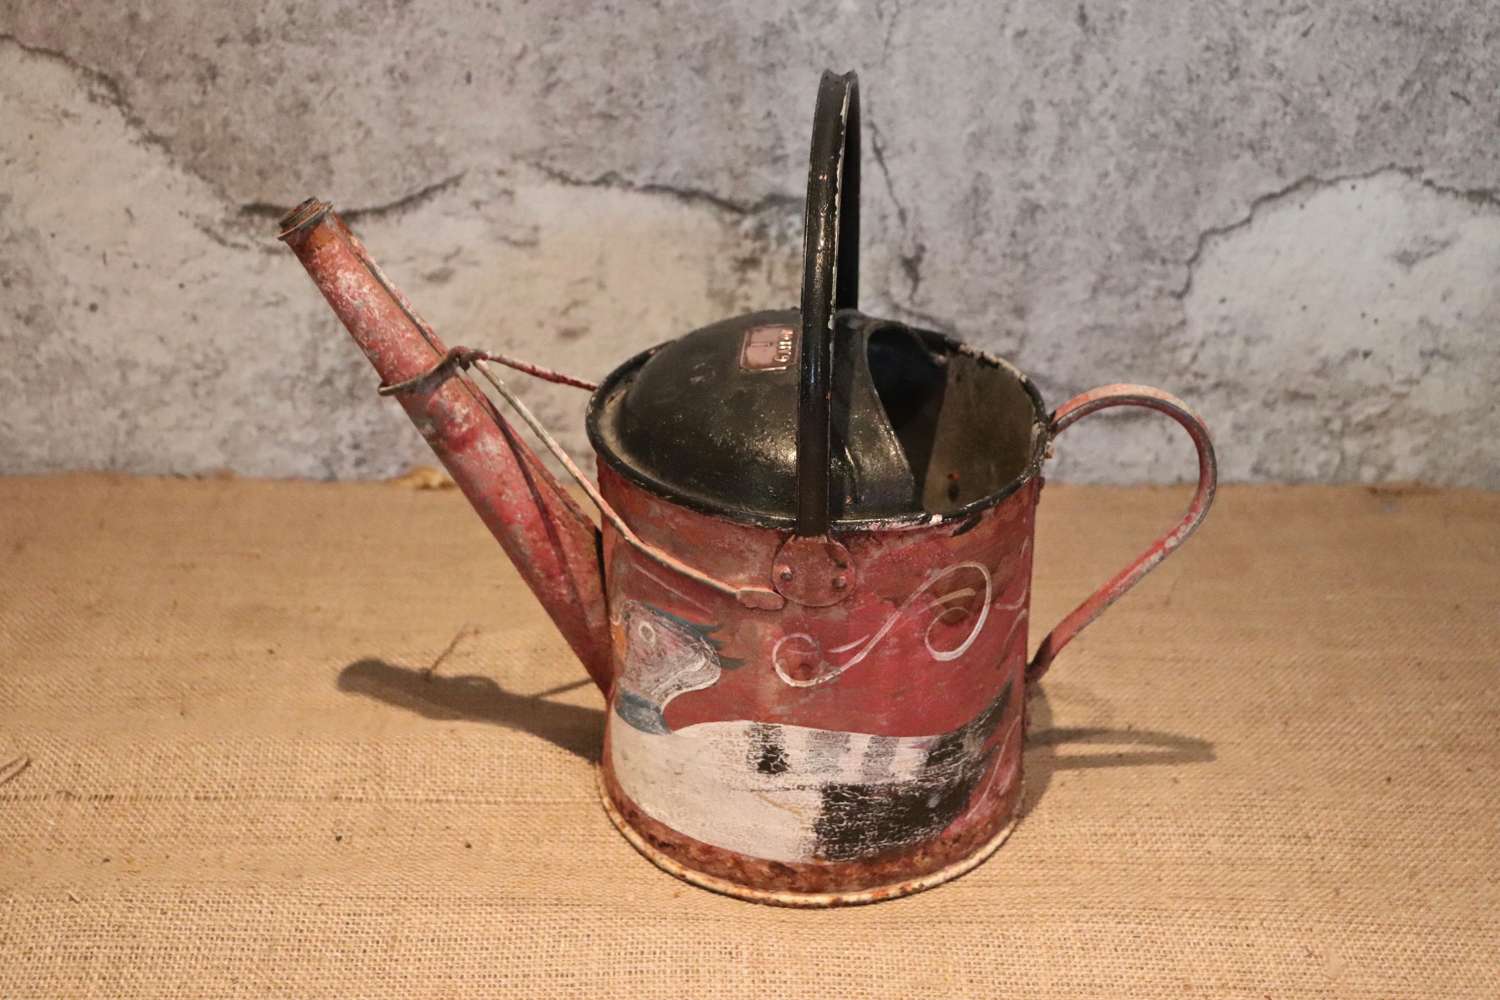 Second quarter 20th century one gallon watering can